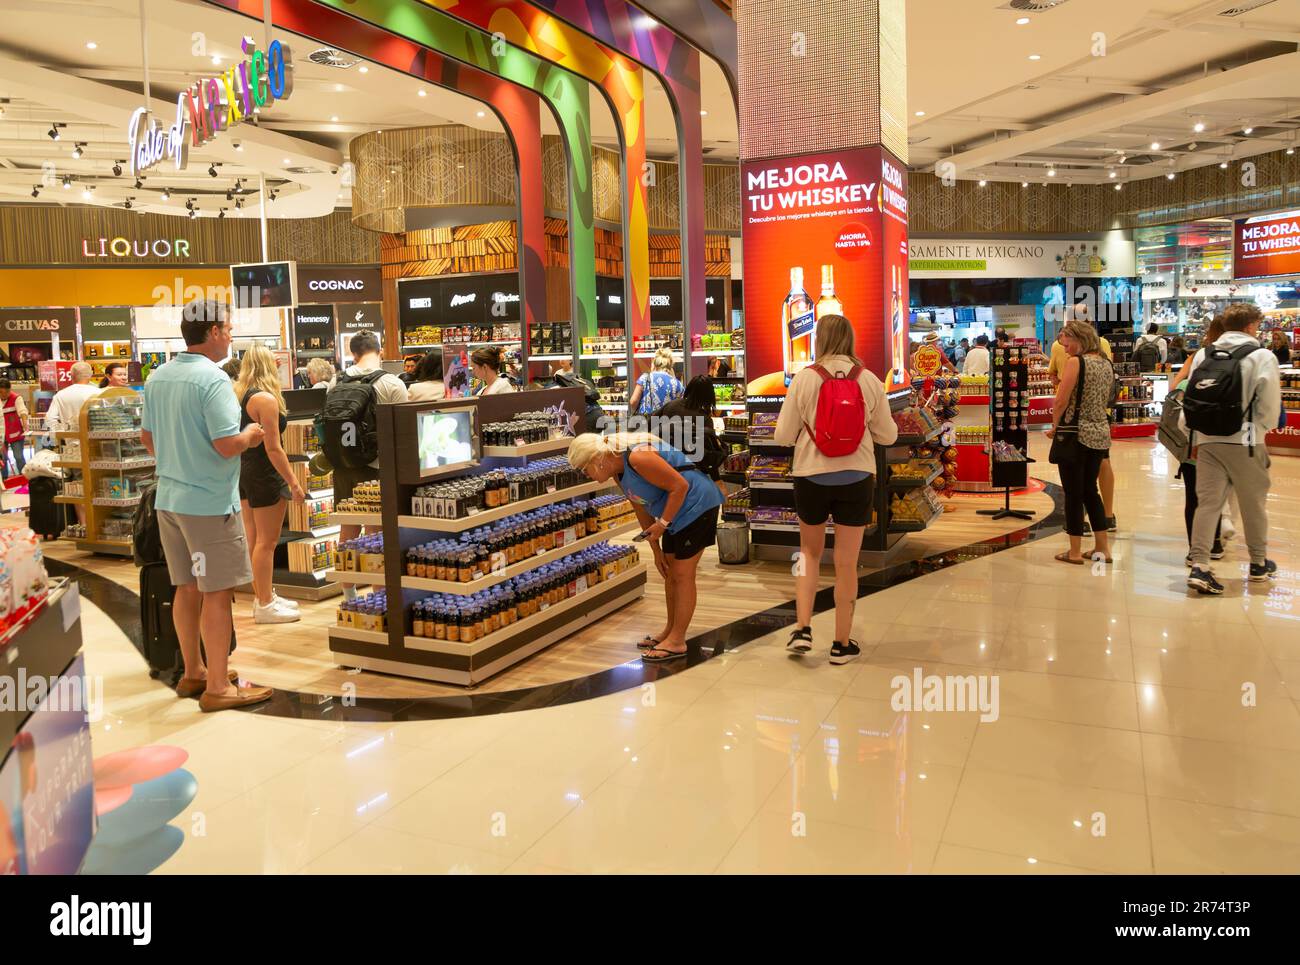 Duty Free shopping area inside Cancun airport, Mexico Stock Photo